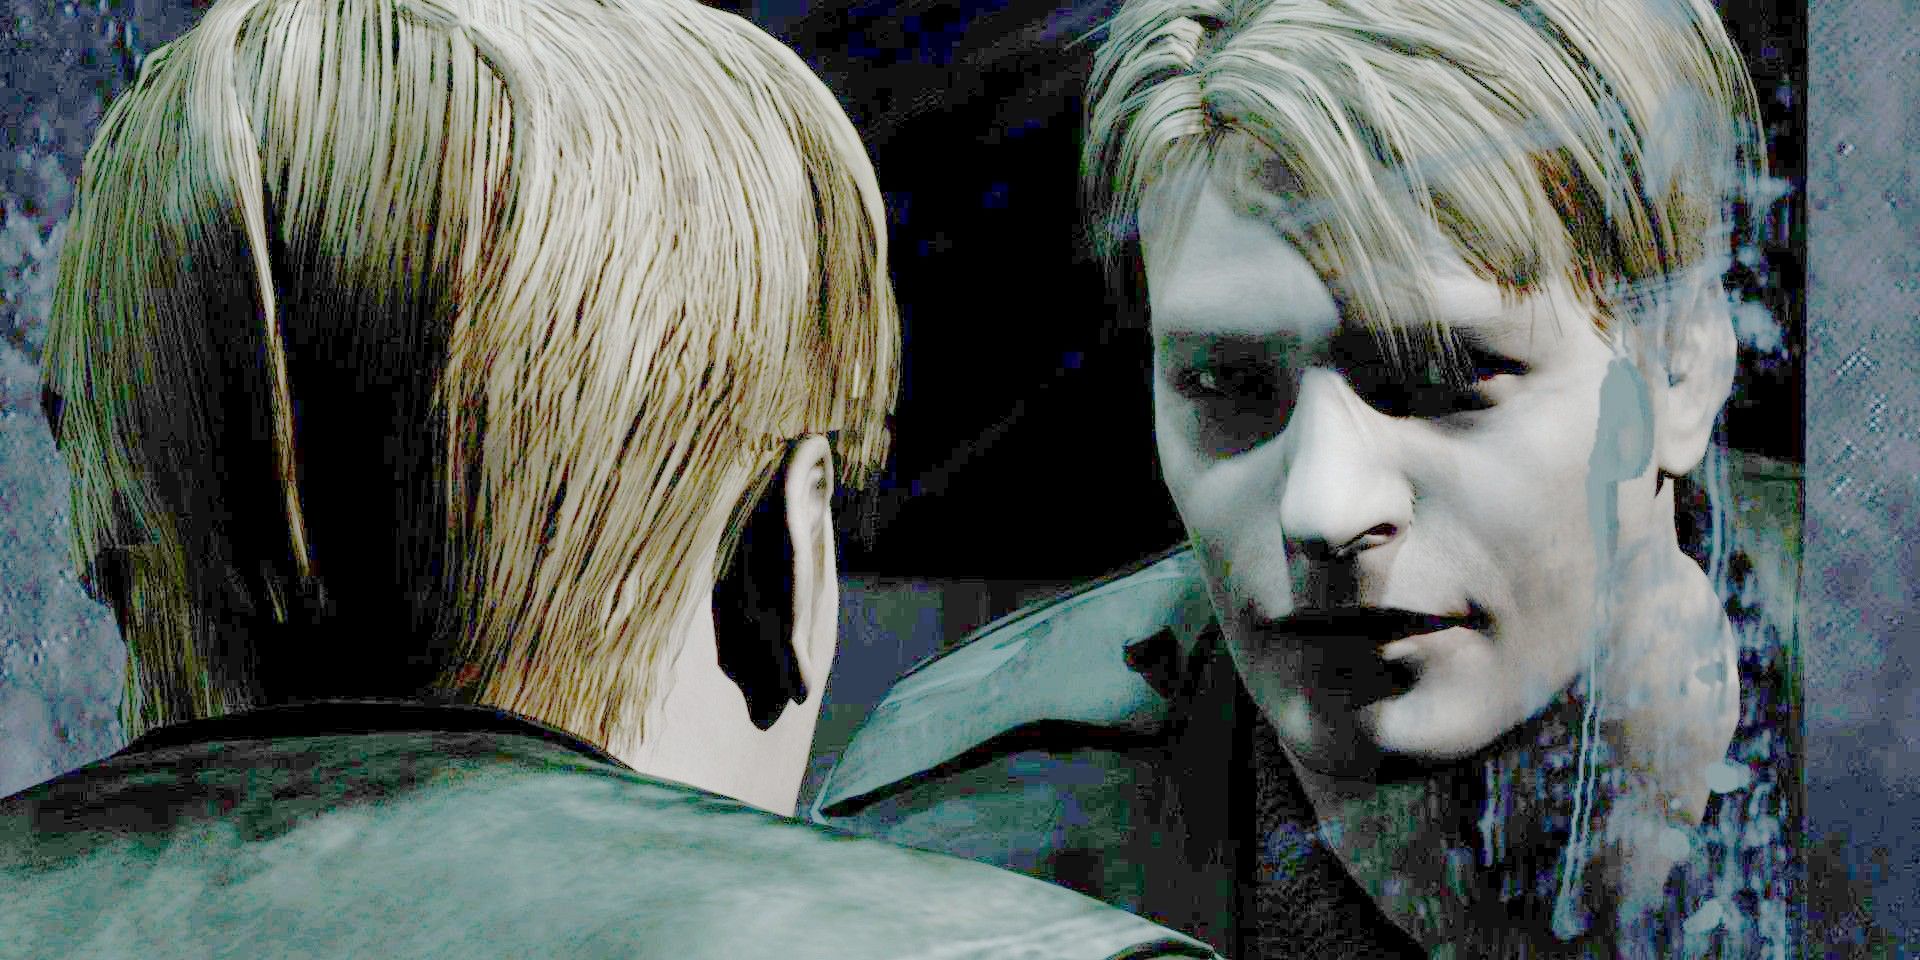 James staring at the player in Silent Hill 2